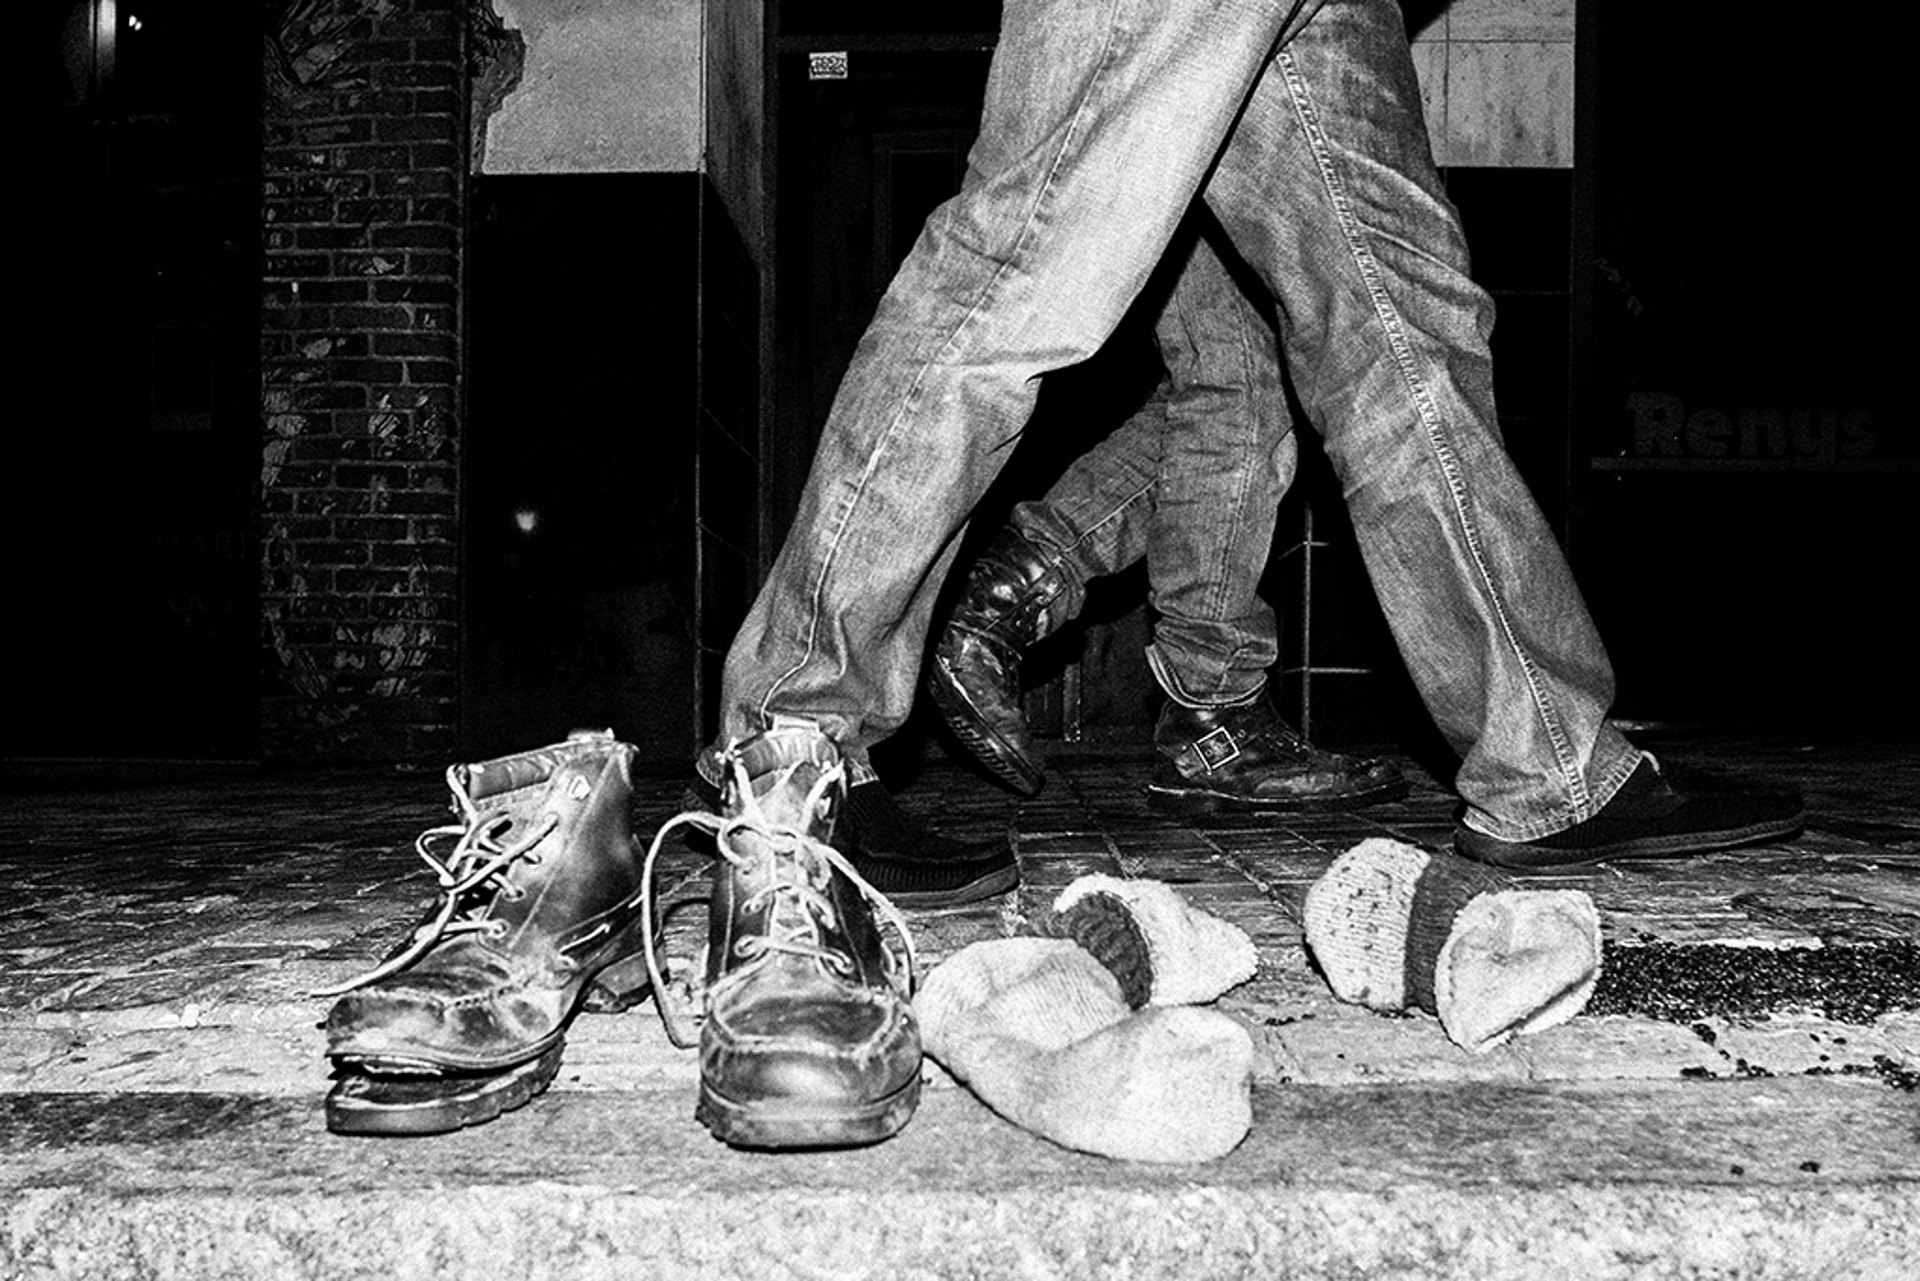 STREET SHOES by NICK GERVIN